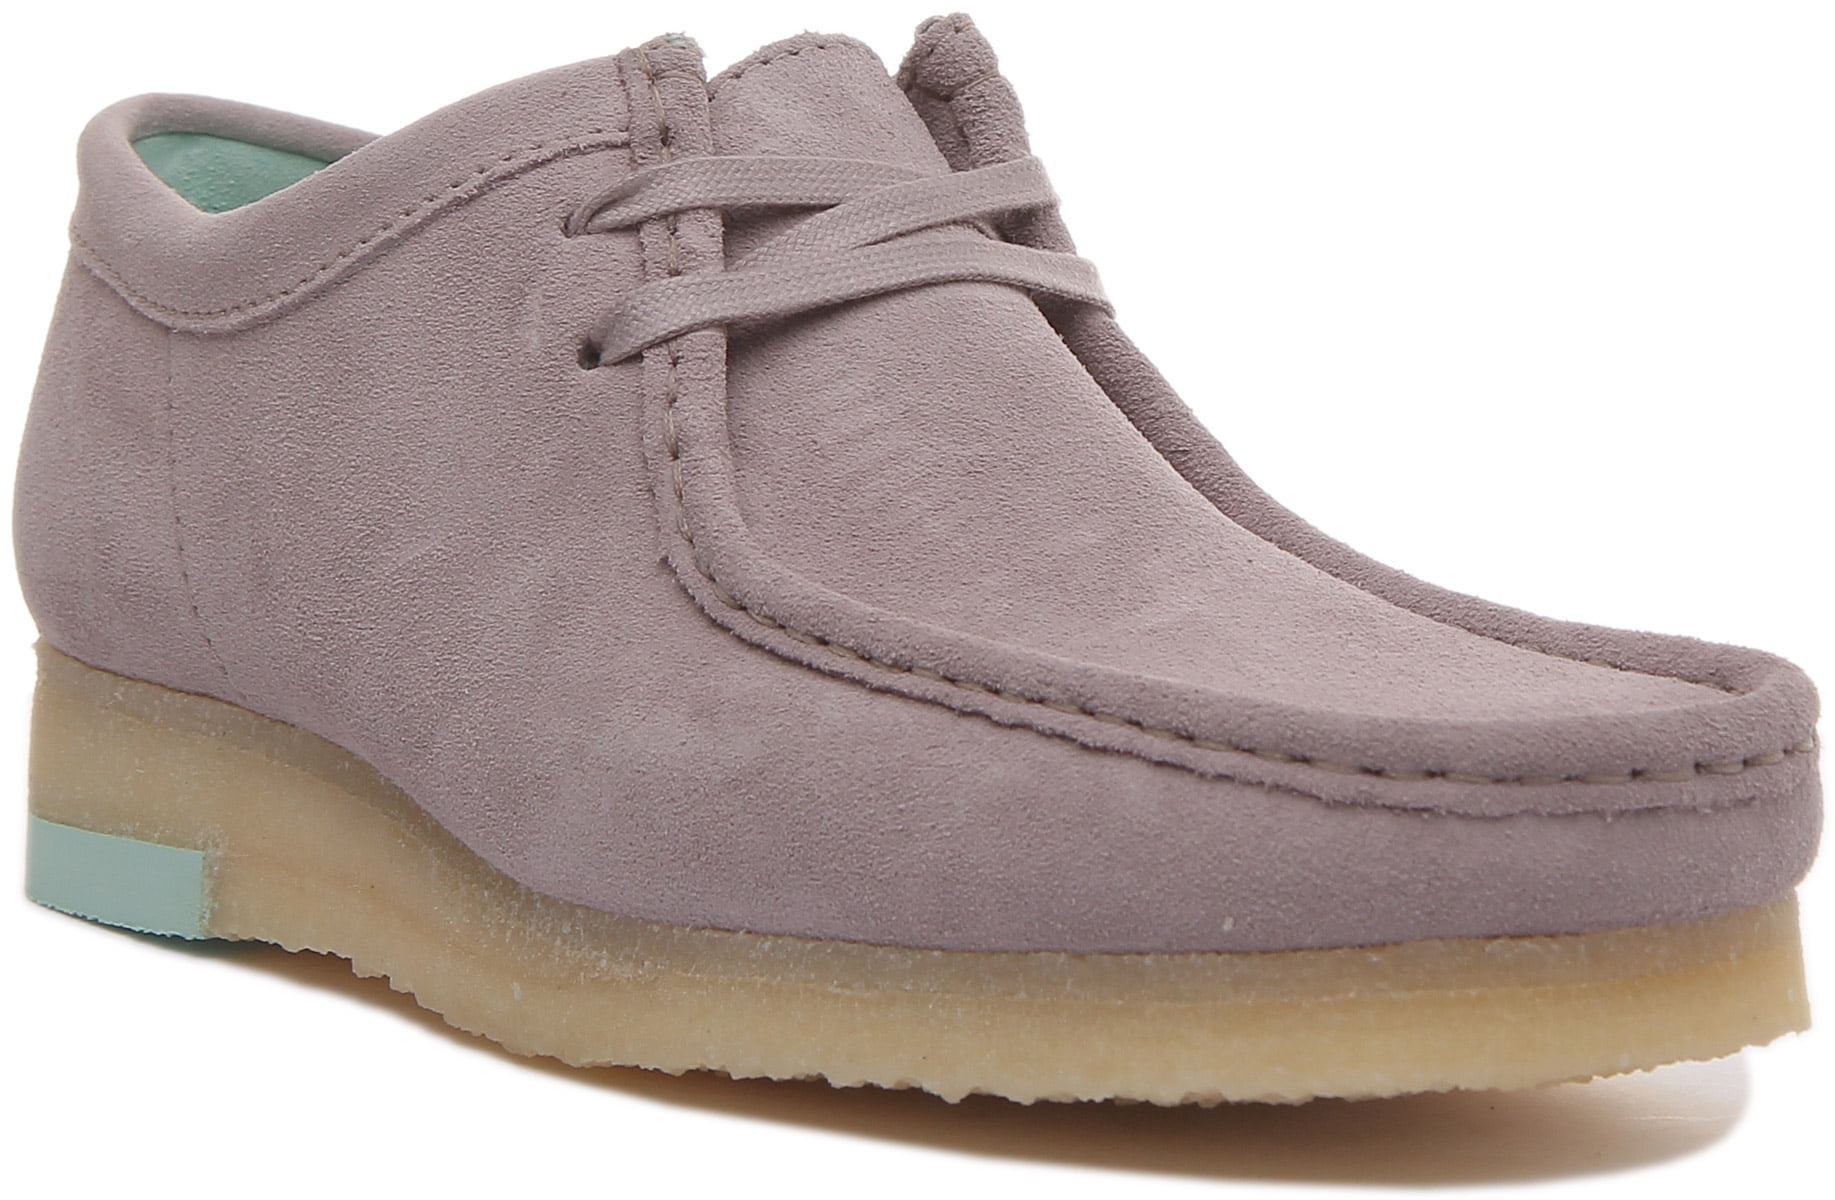 Clarks Wallabee Men's 2 Eyelet Lace Up Shoes In Grey 10 - Walmart.com